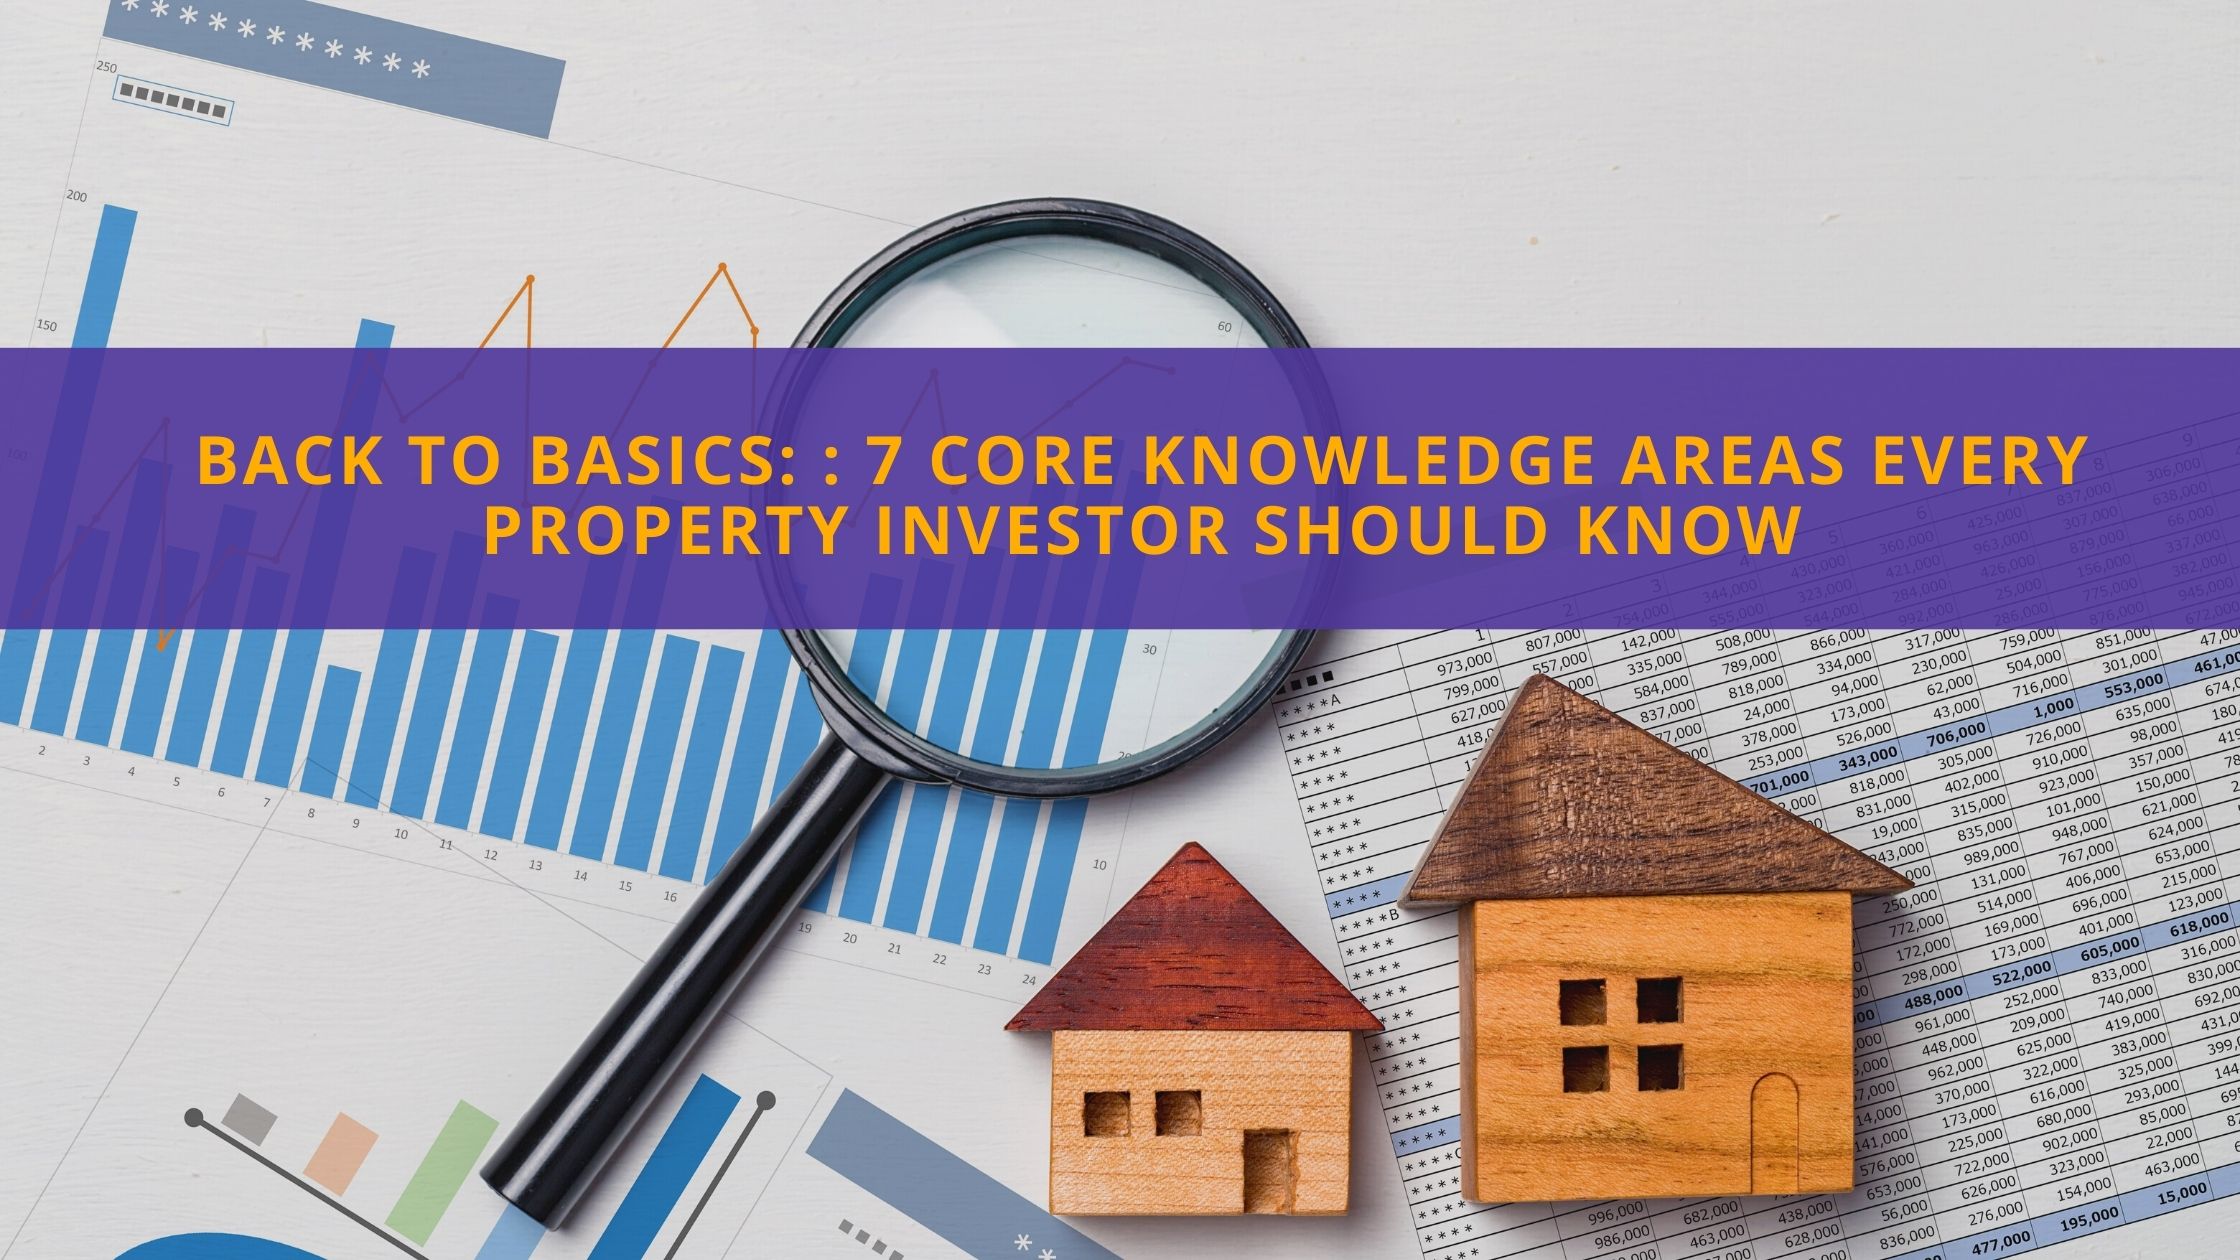 Back to basics: 7 core knowledge areas every Property Investor should know